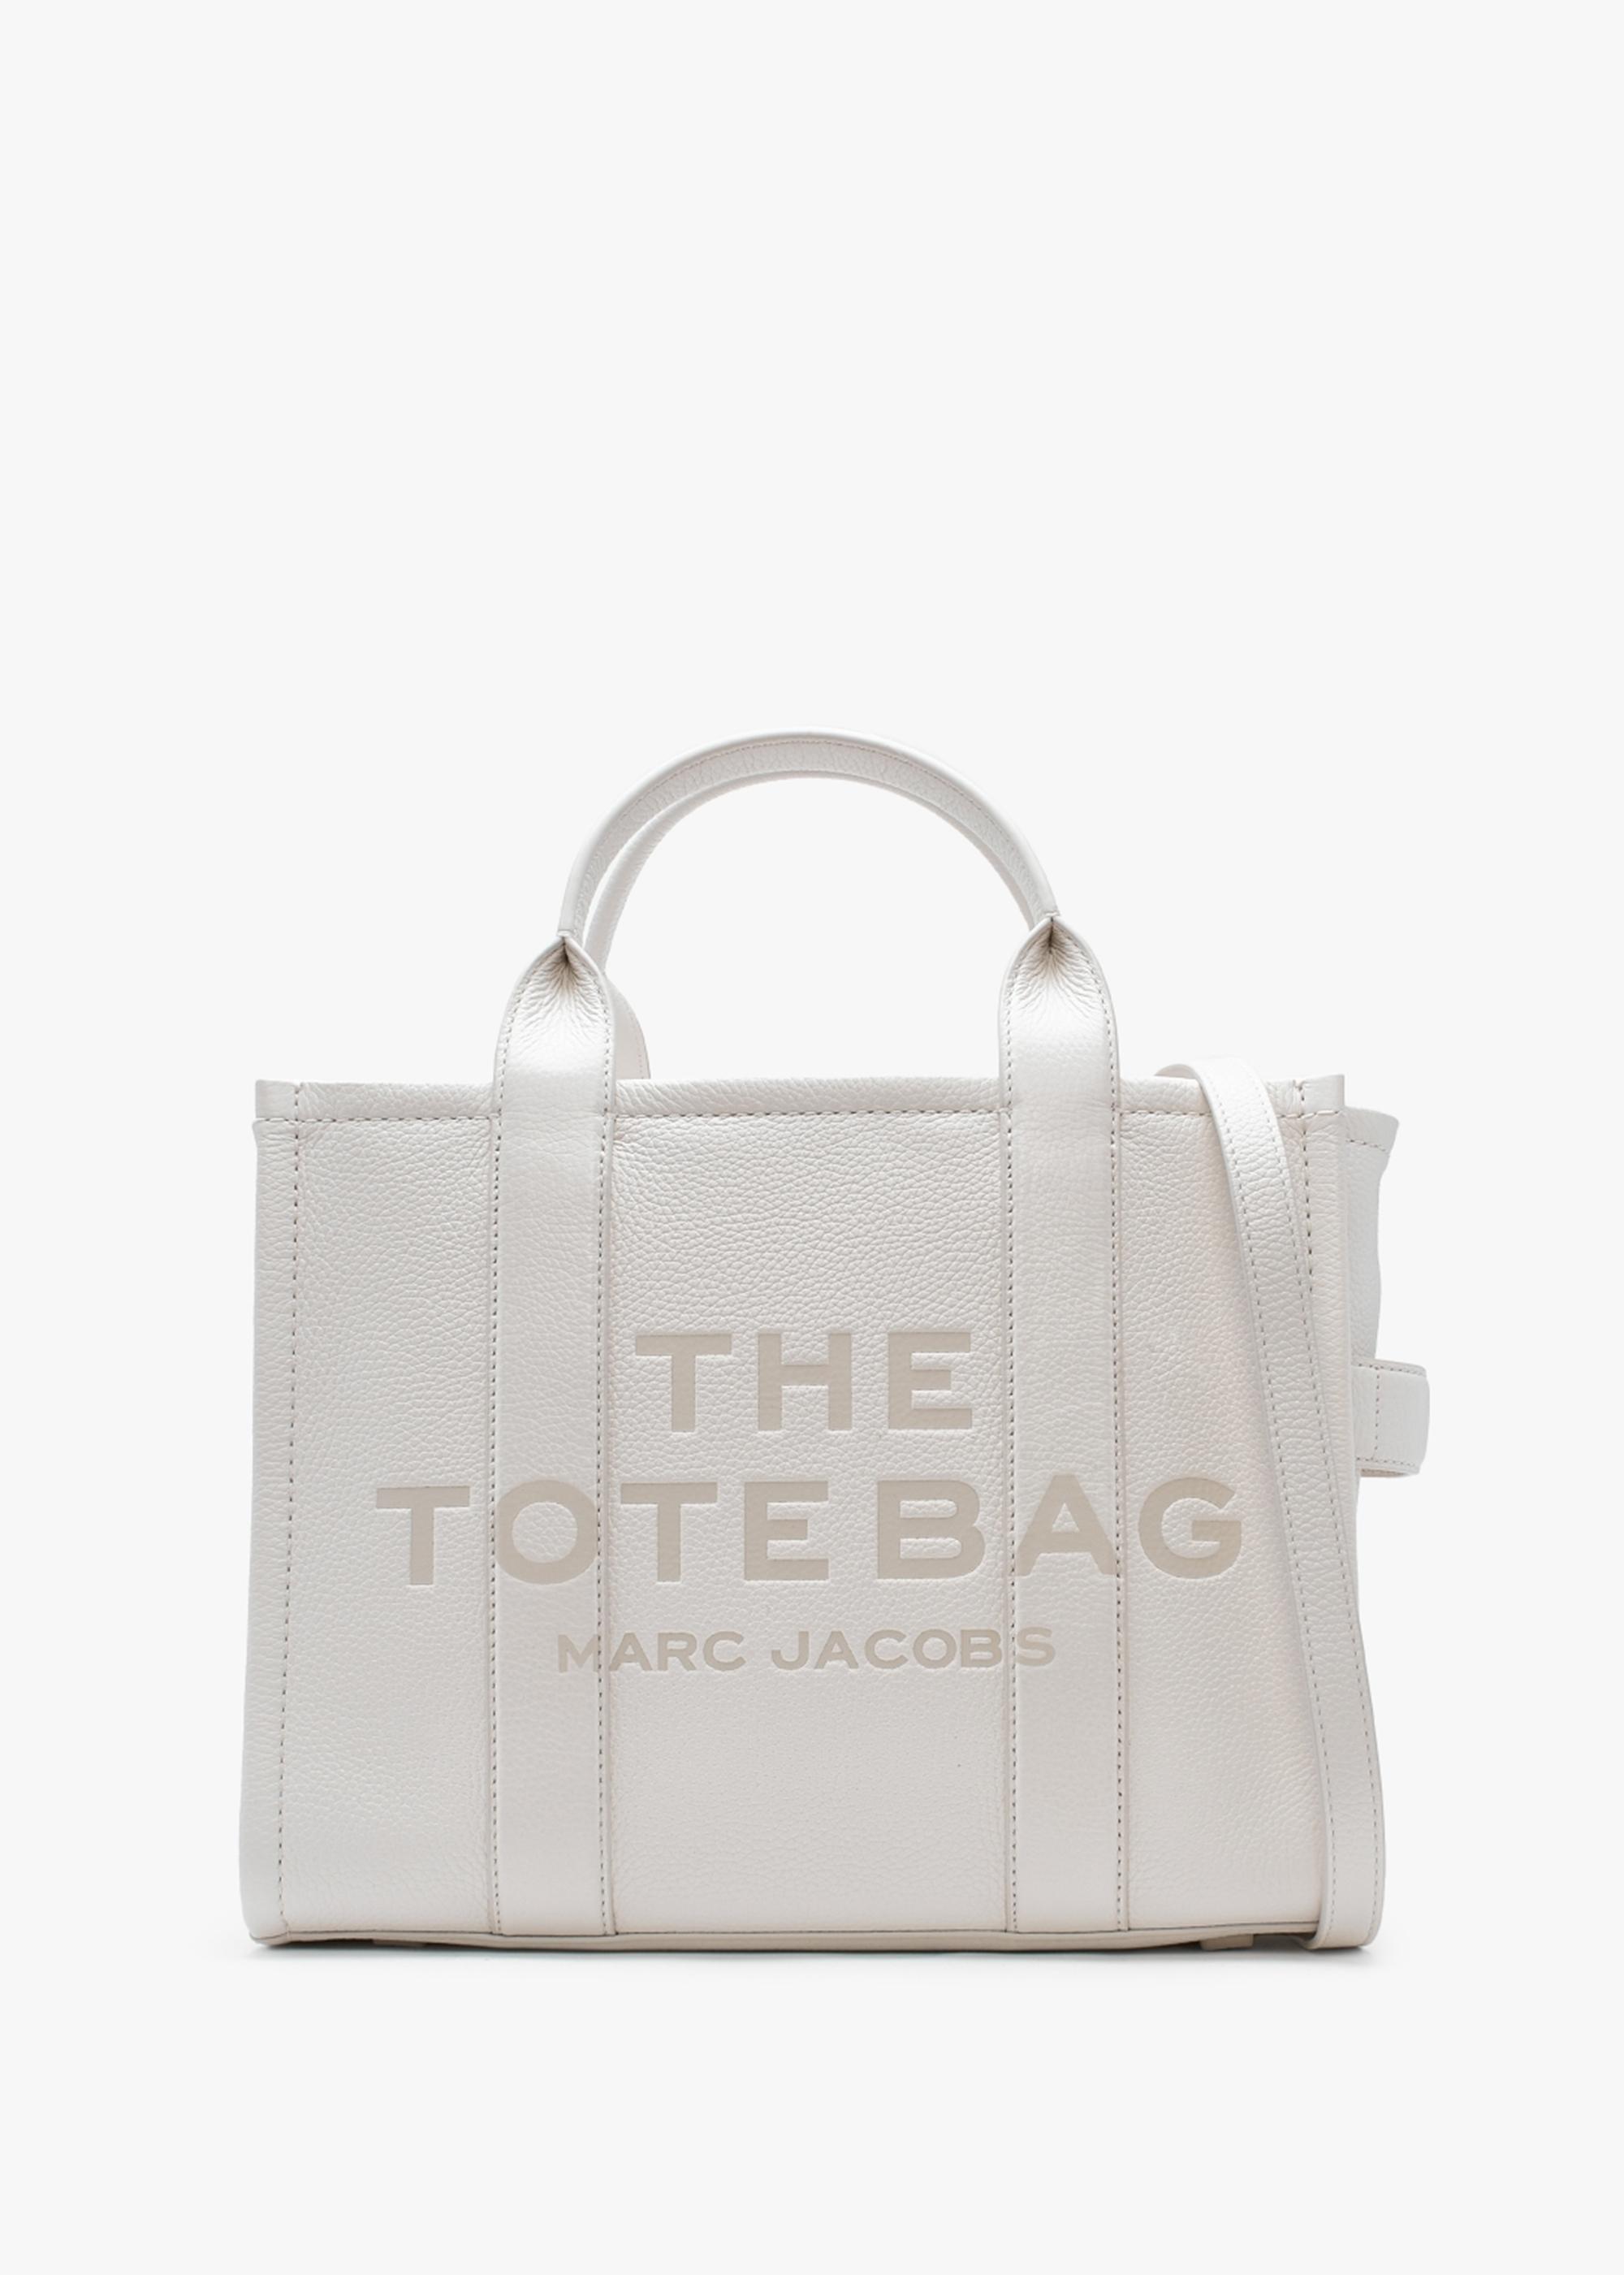 Marc Jacobs The Leather Medium Cotton Silver Tote Bag in White